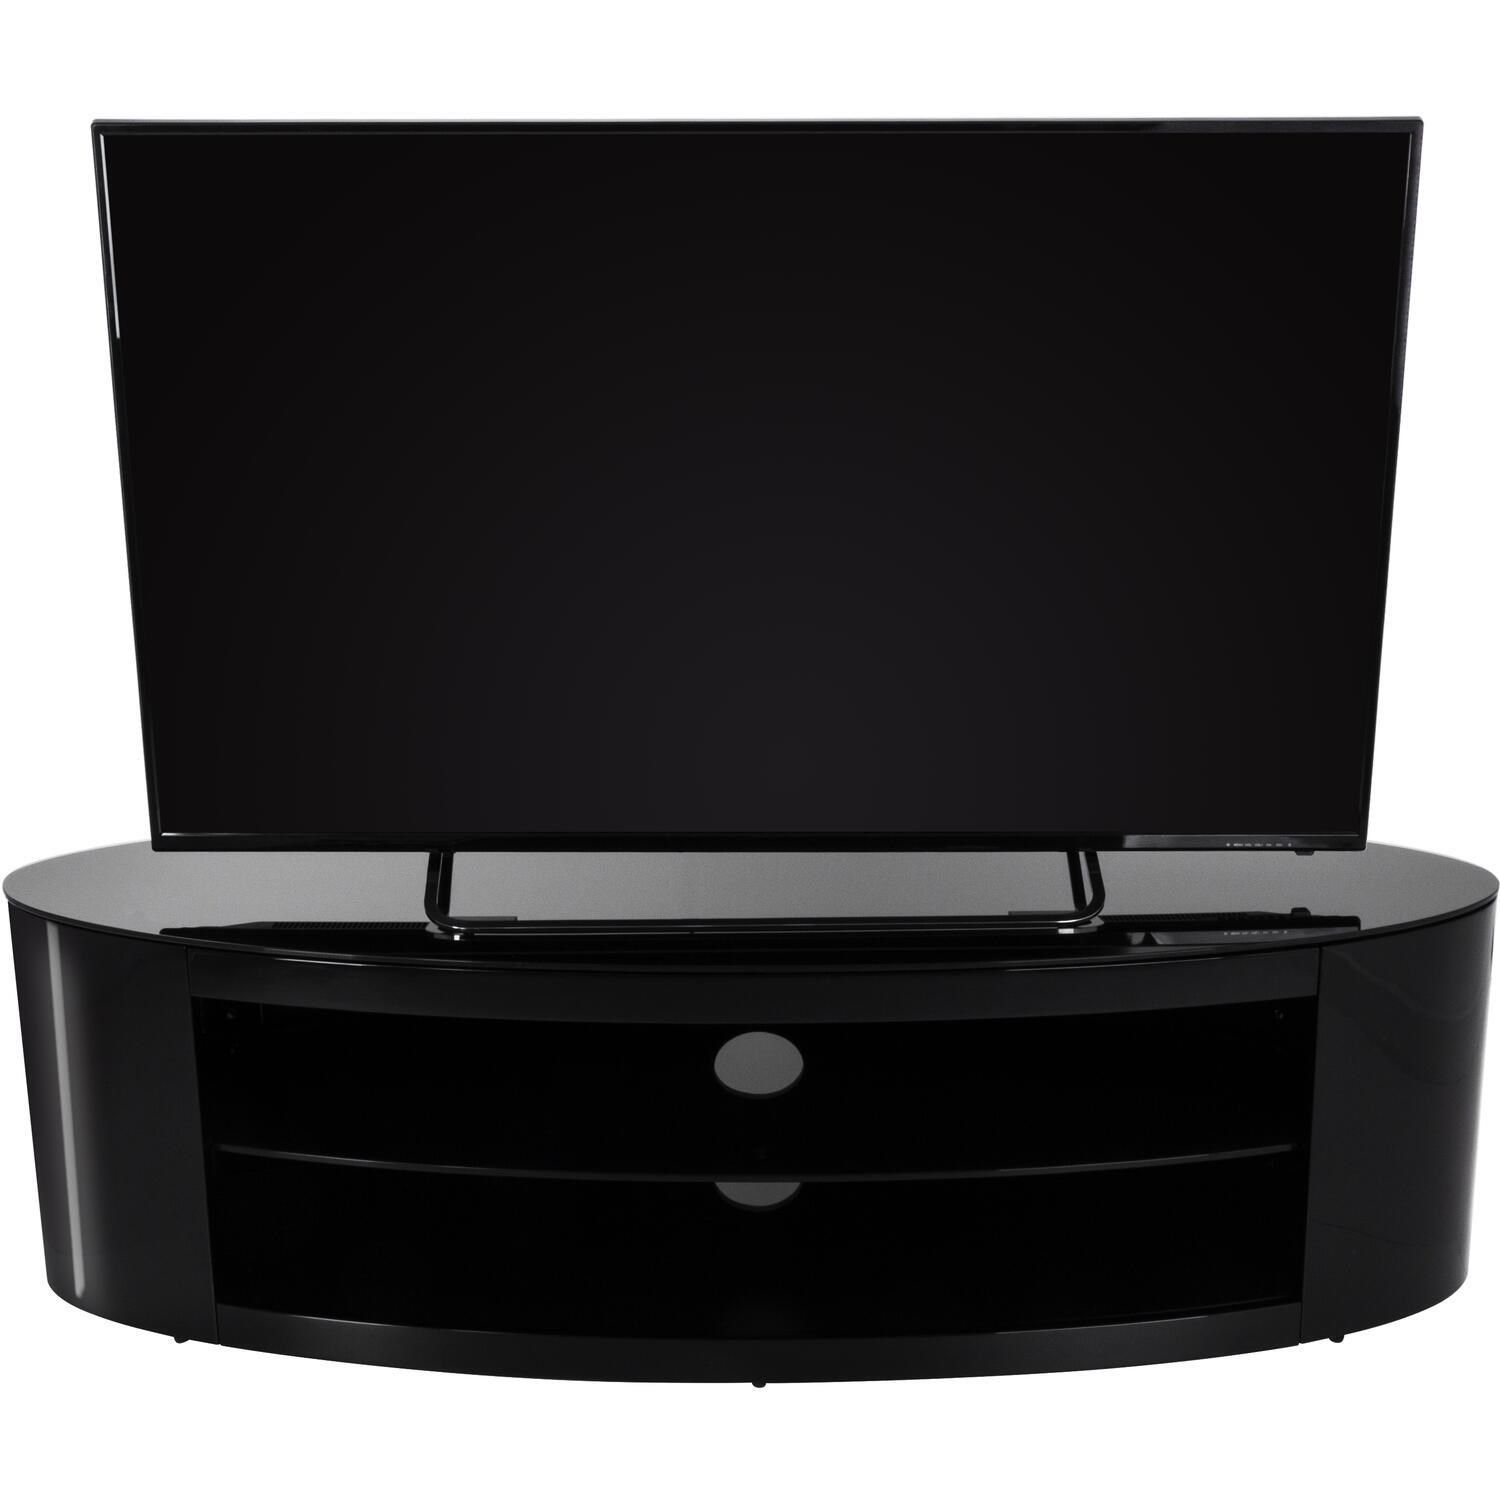 Buckingham Affinity Oval Tv Stand 1400 Black / Black Glass Throughout Black Oval Tv Stand (View 2 of 15)